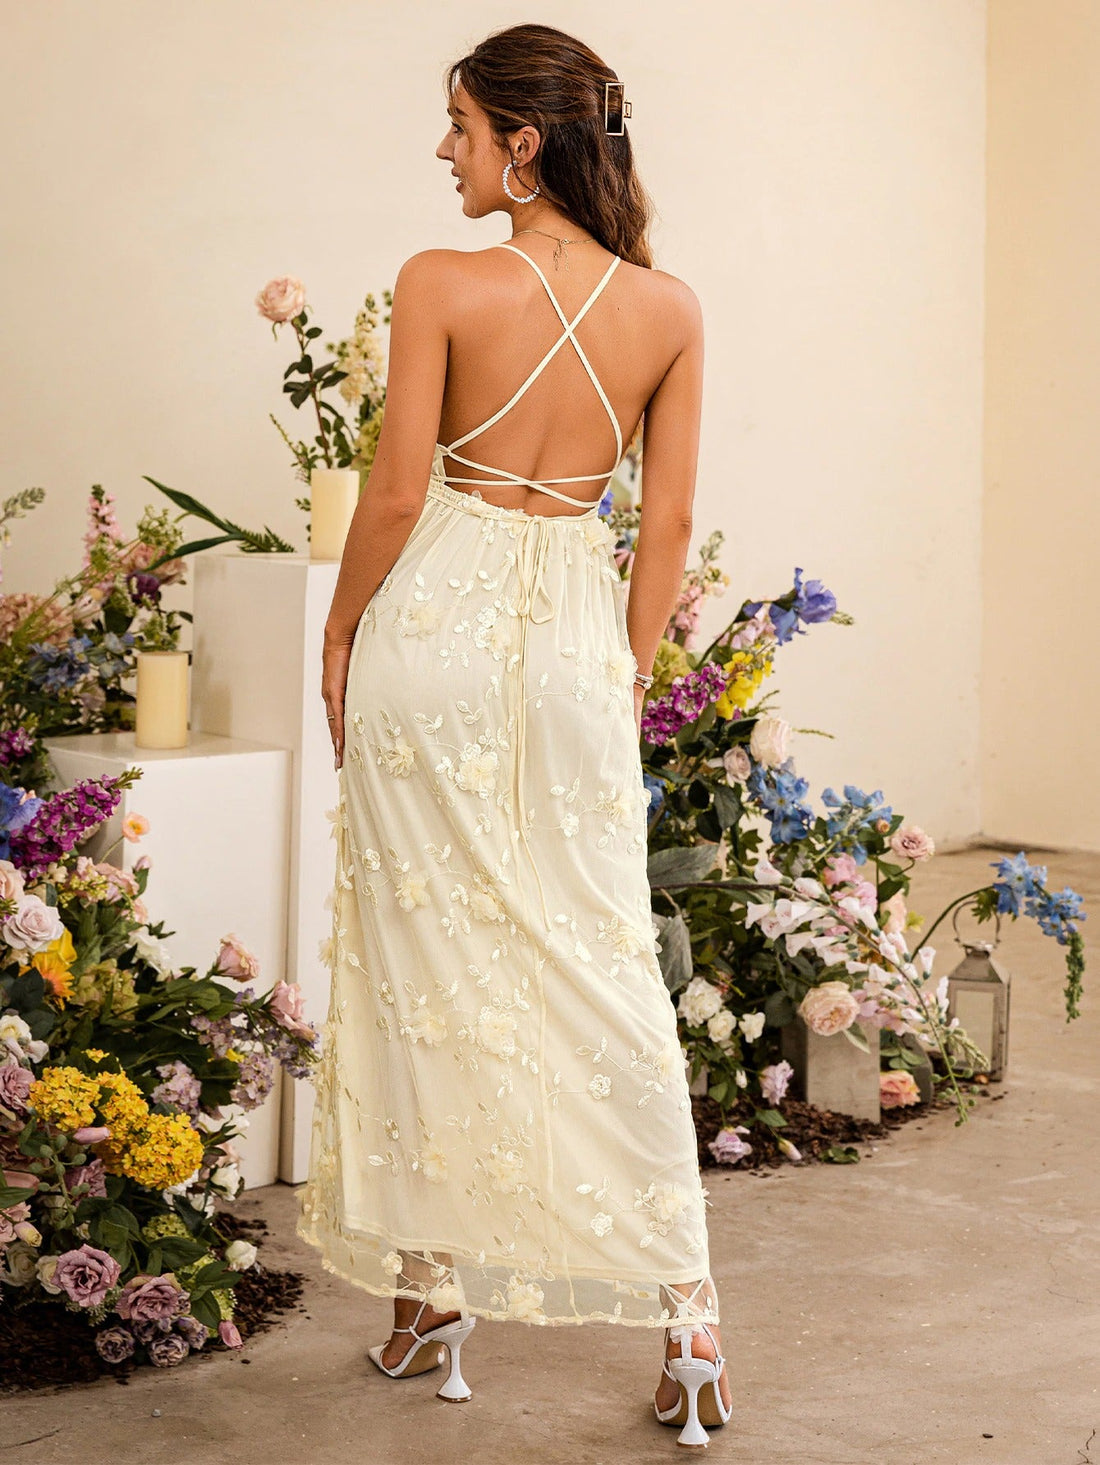 Women's Summer Embroidery Lace Up Backless Dress